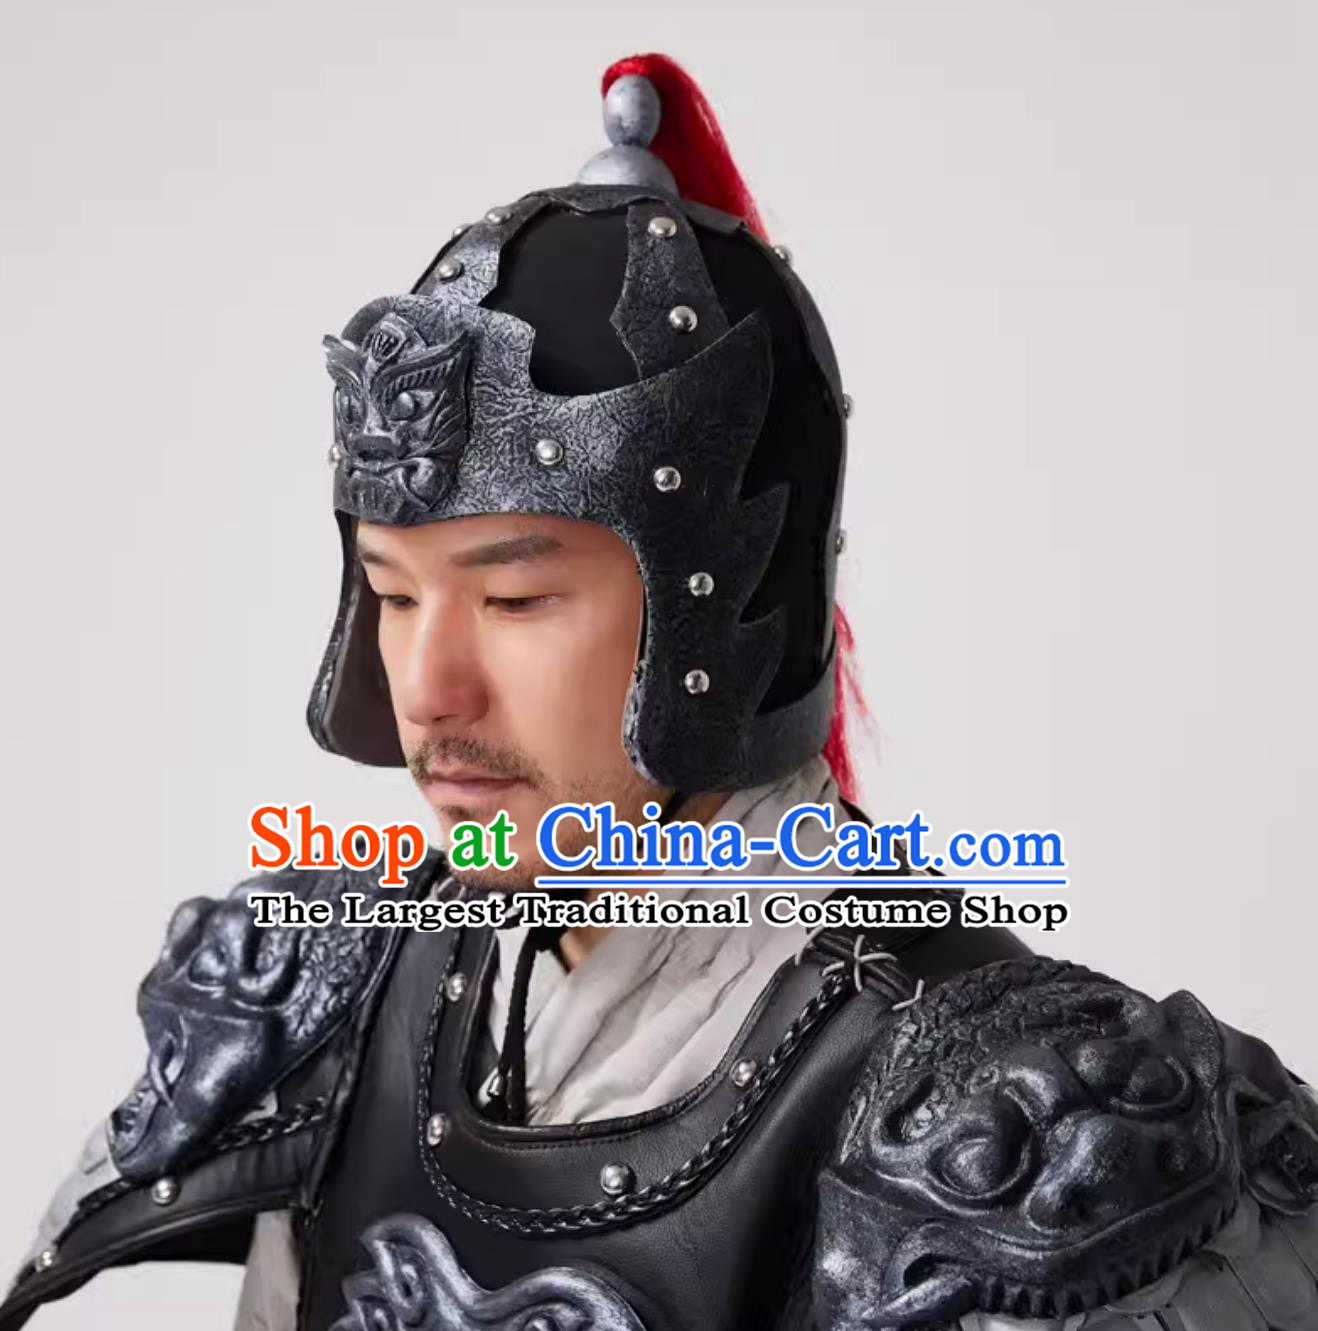 Ancient Chinese Clothing Traditional Stage Performance Warrior Costume China Han Dynasty General Armor and Helmet Complete Set